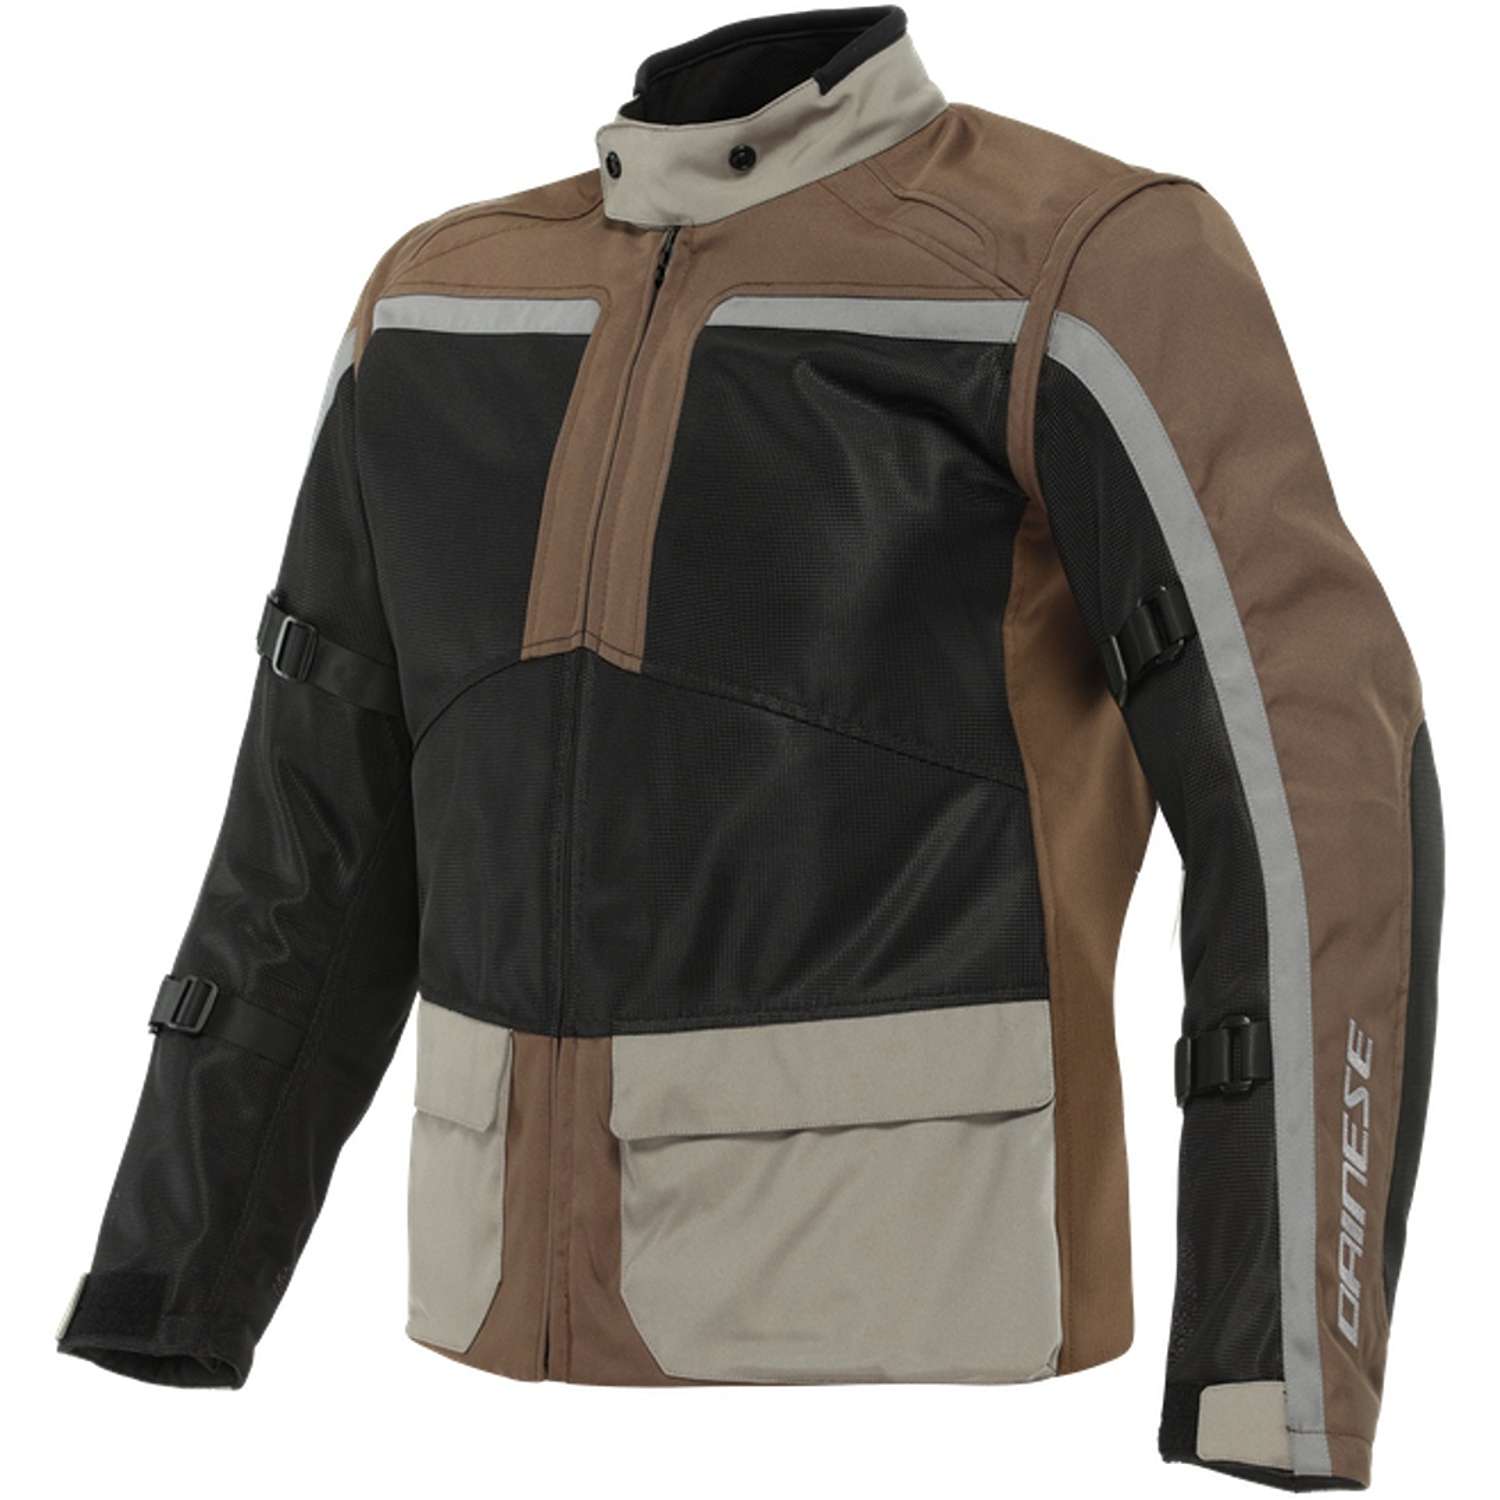 Image of Dainese Outlaw Tex Jacket Black Carafe Walnut Charcoal Talla 50